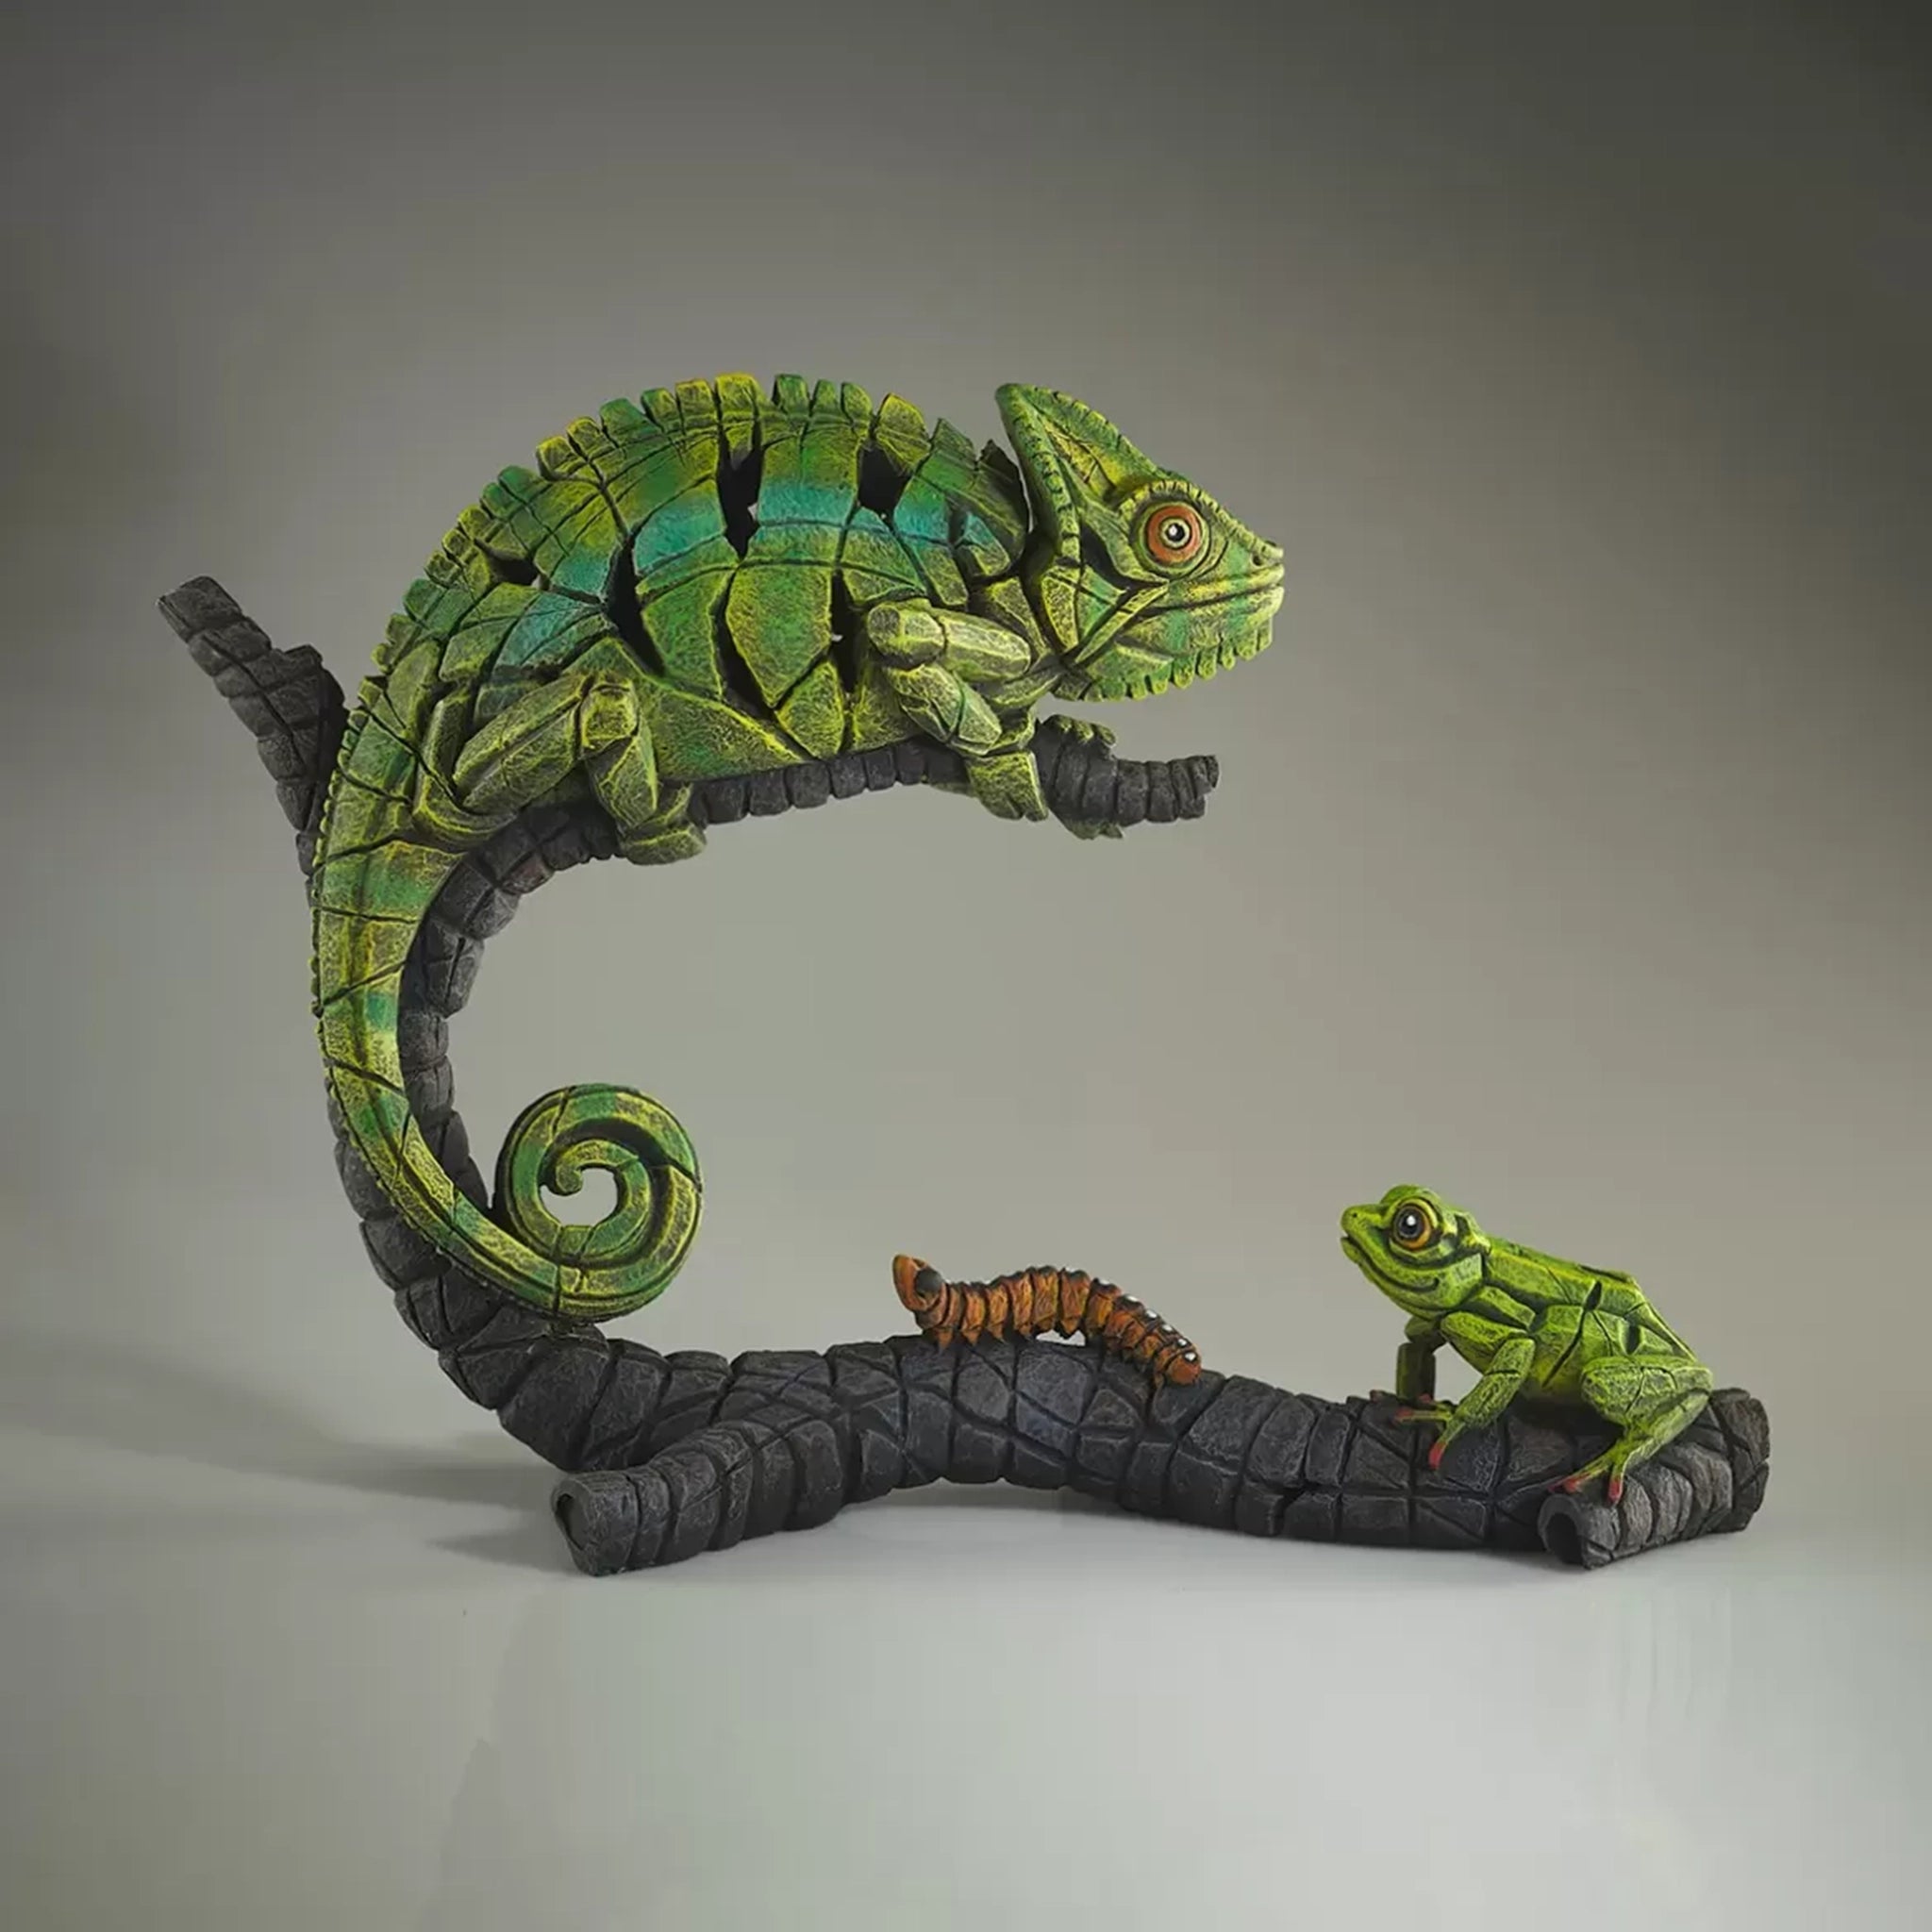 A textured and painted green chameleon on log sculpture with tree frog sculpture